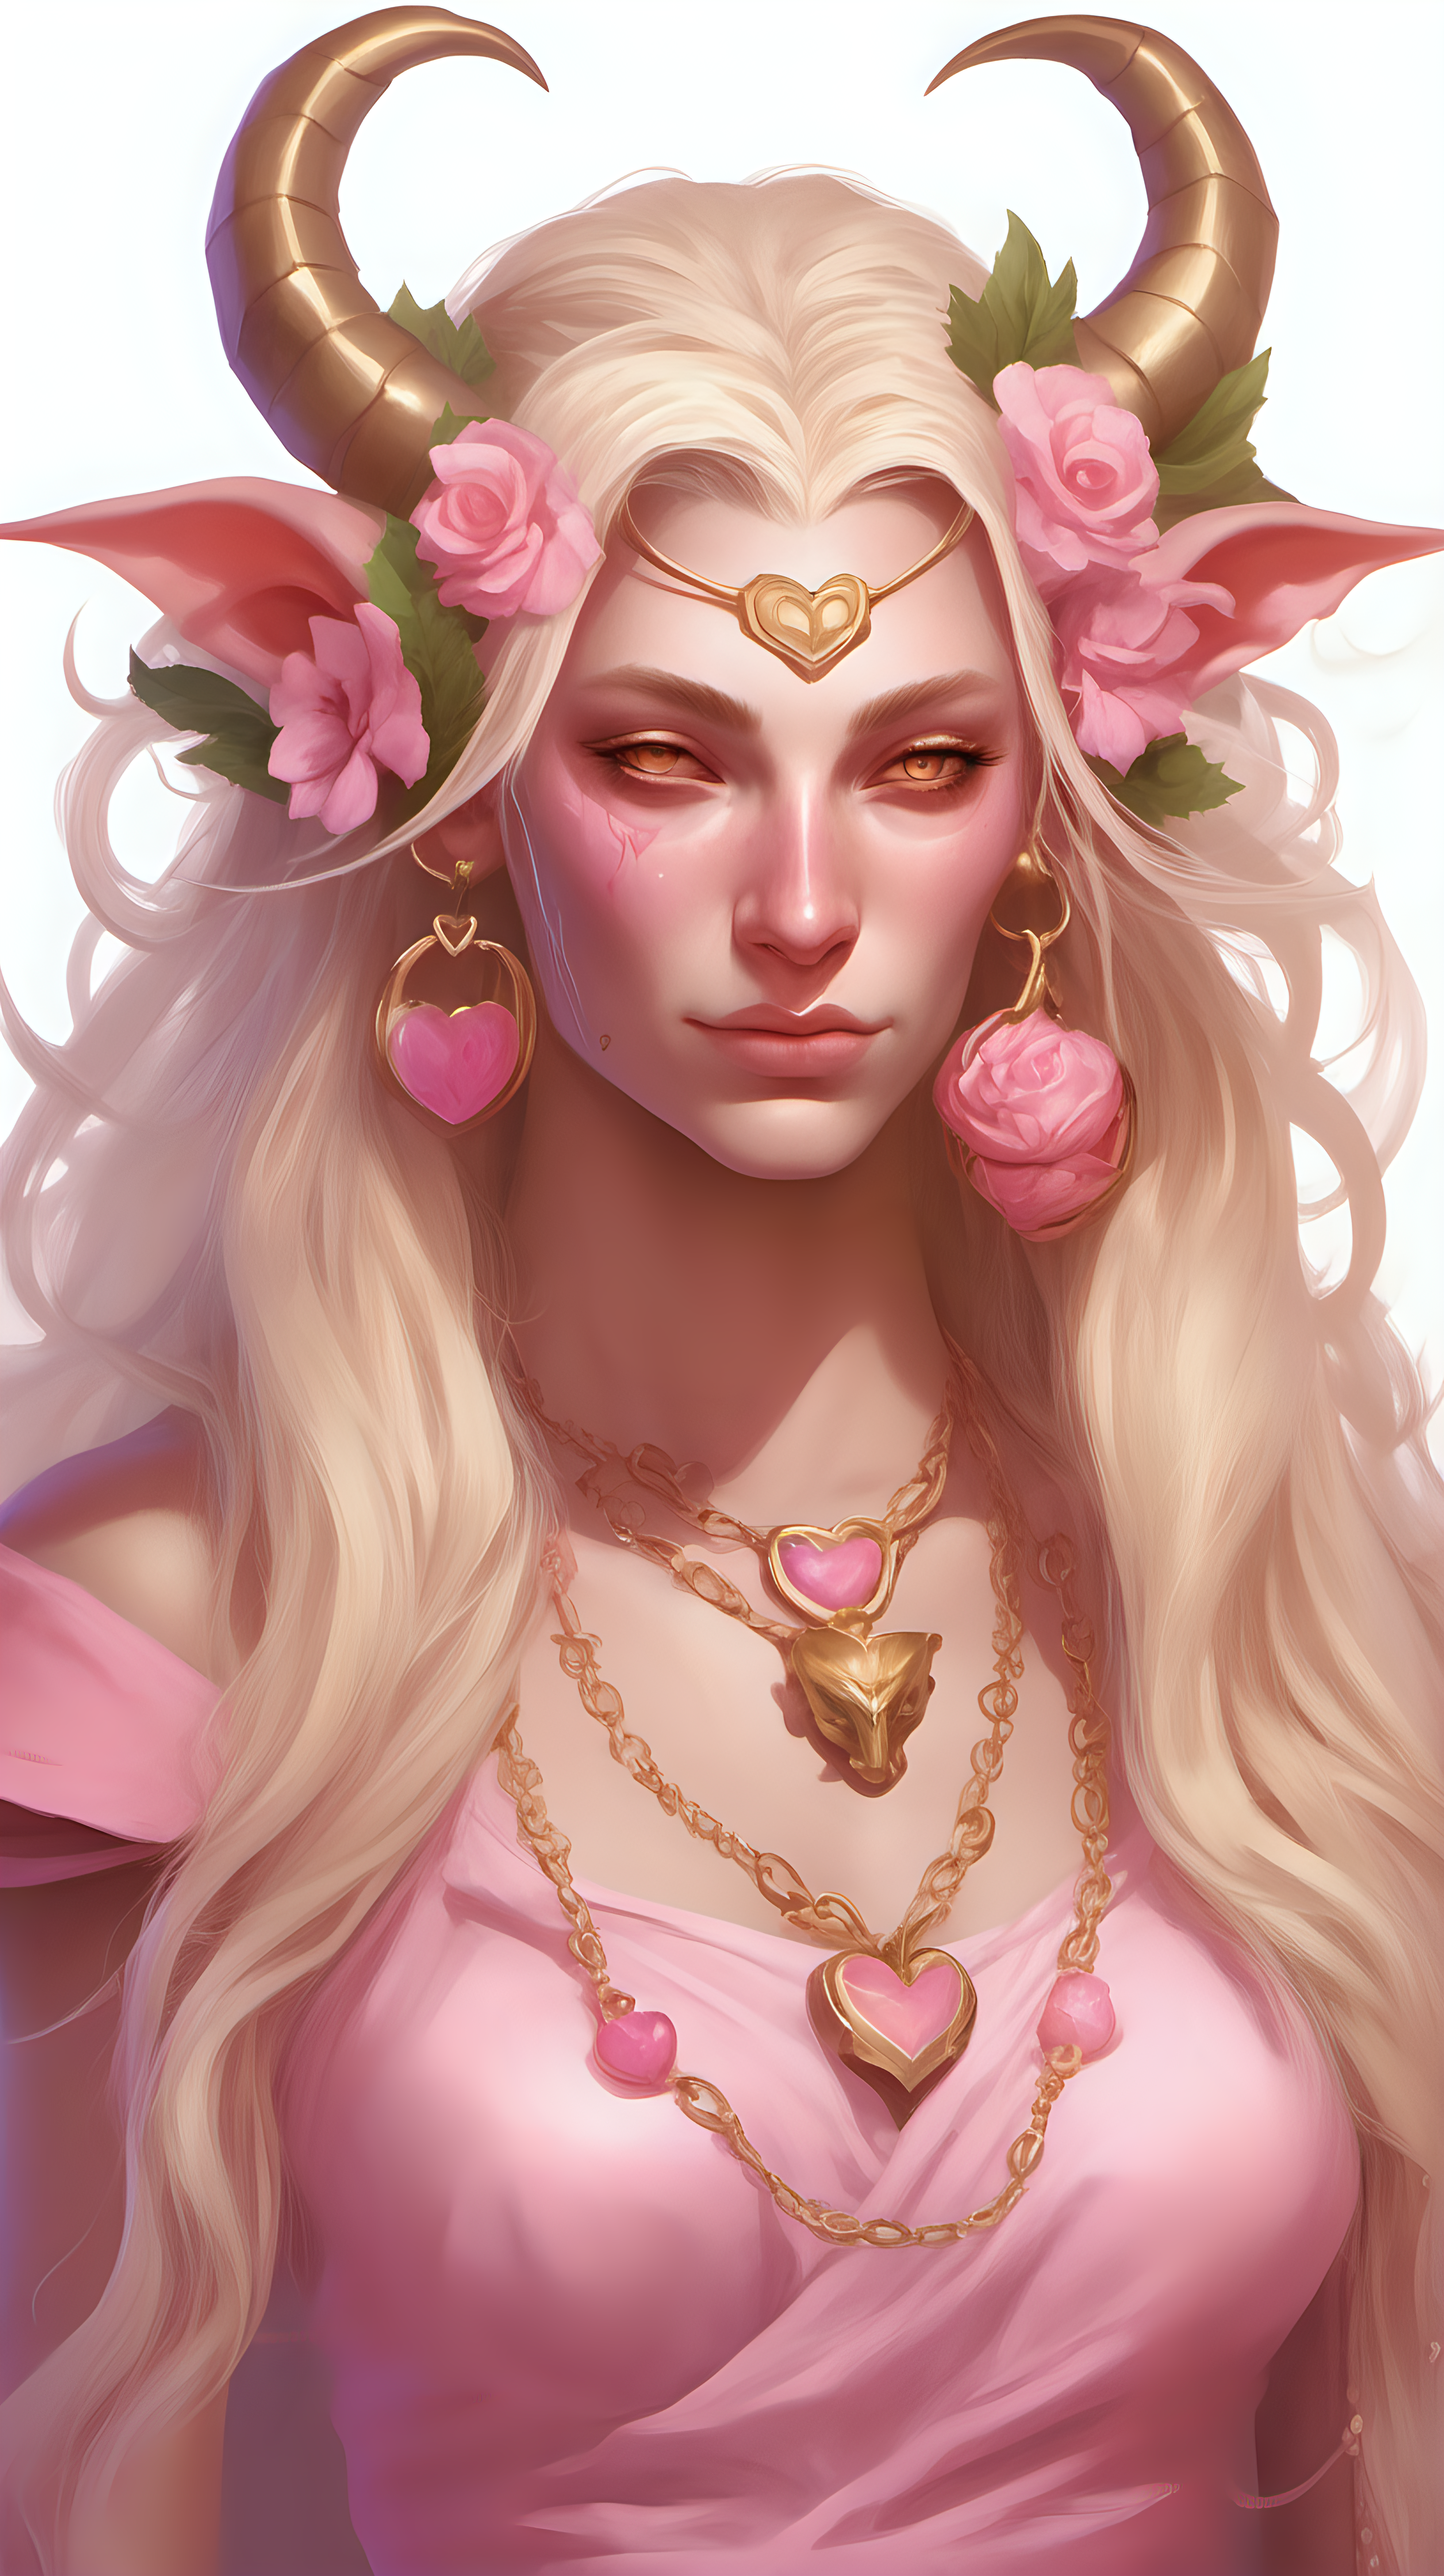 Pink skinned tiefling woman She has white horns